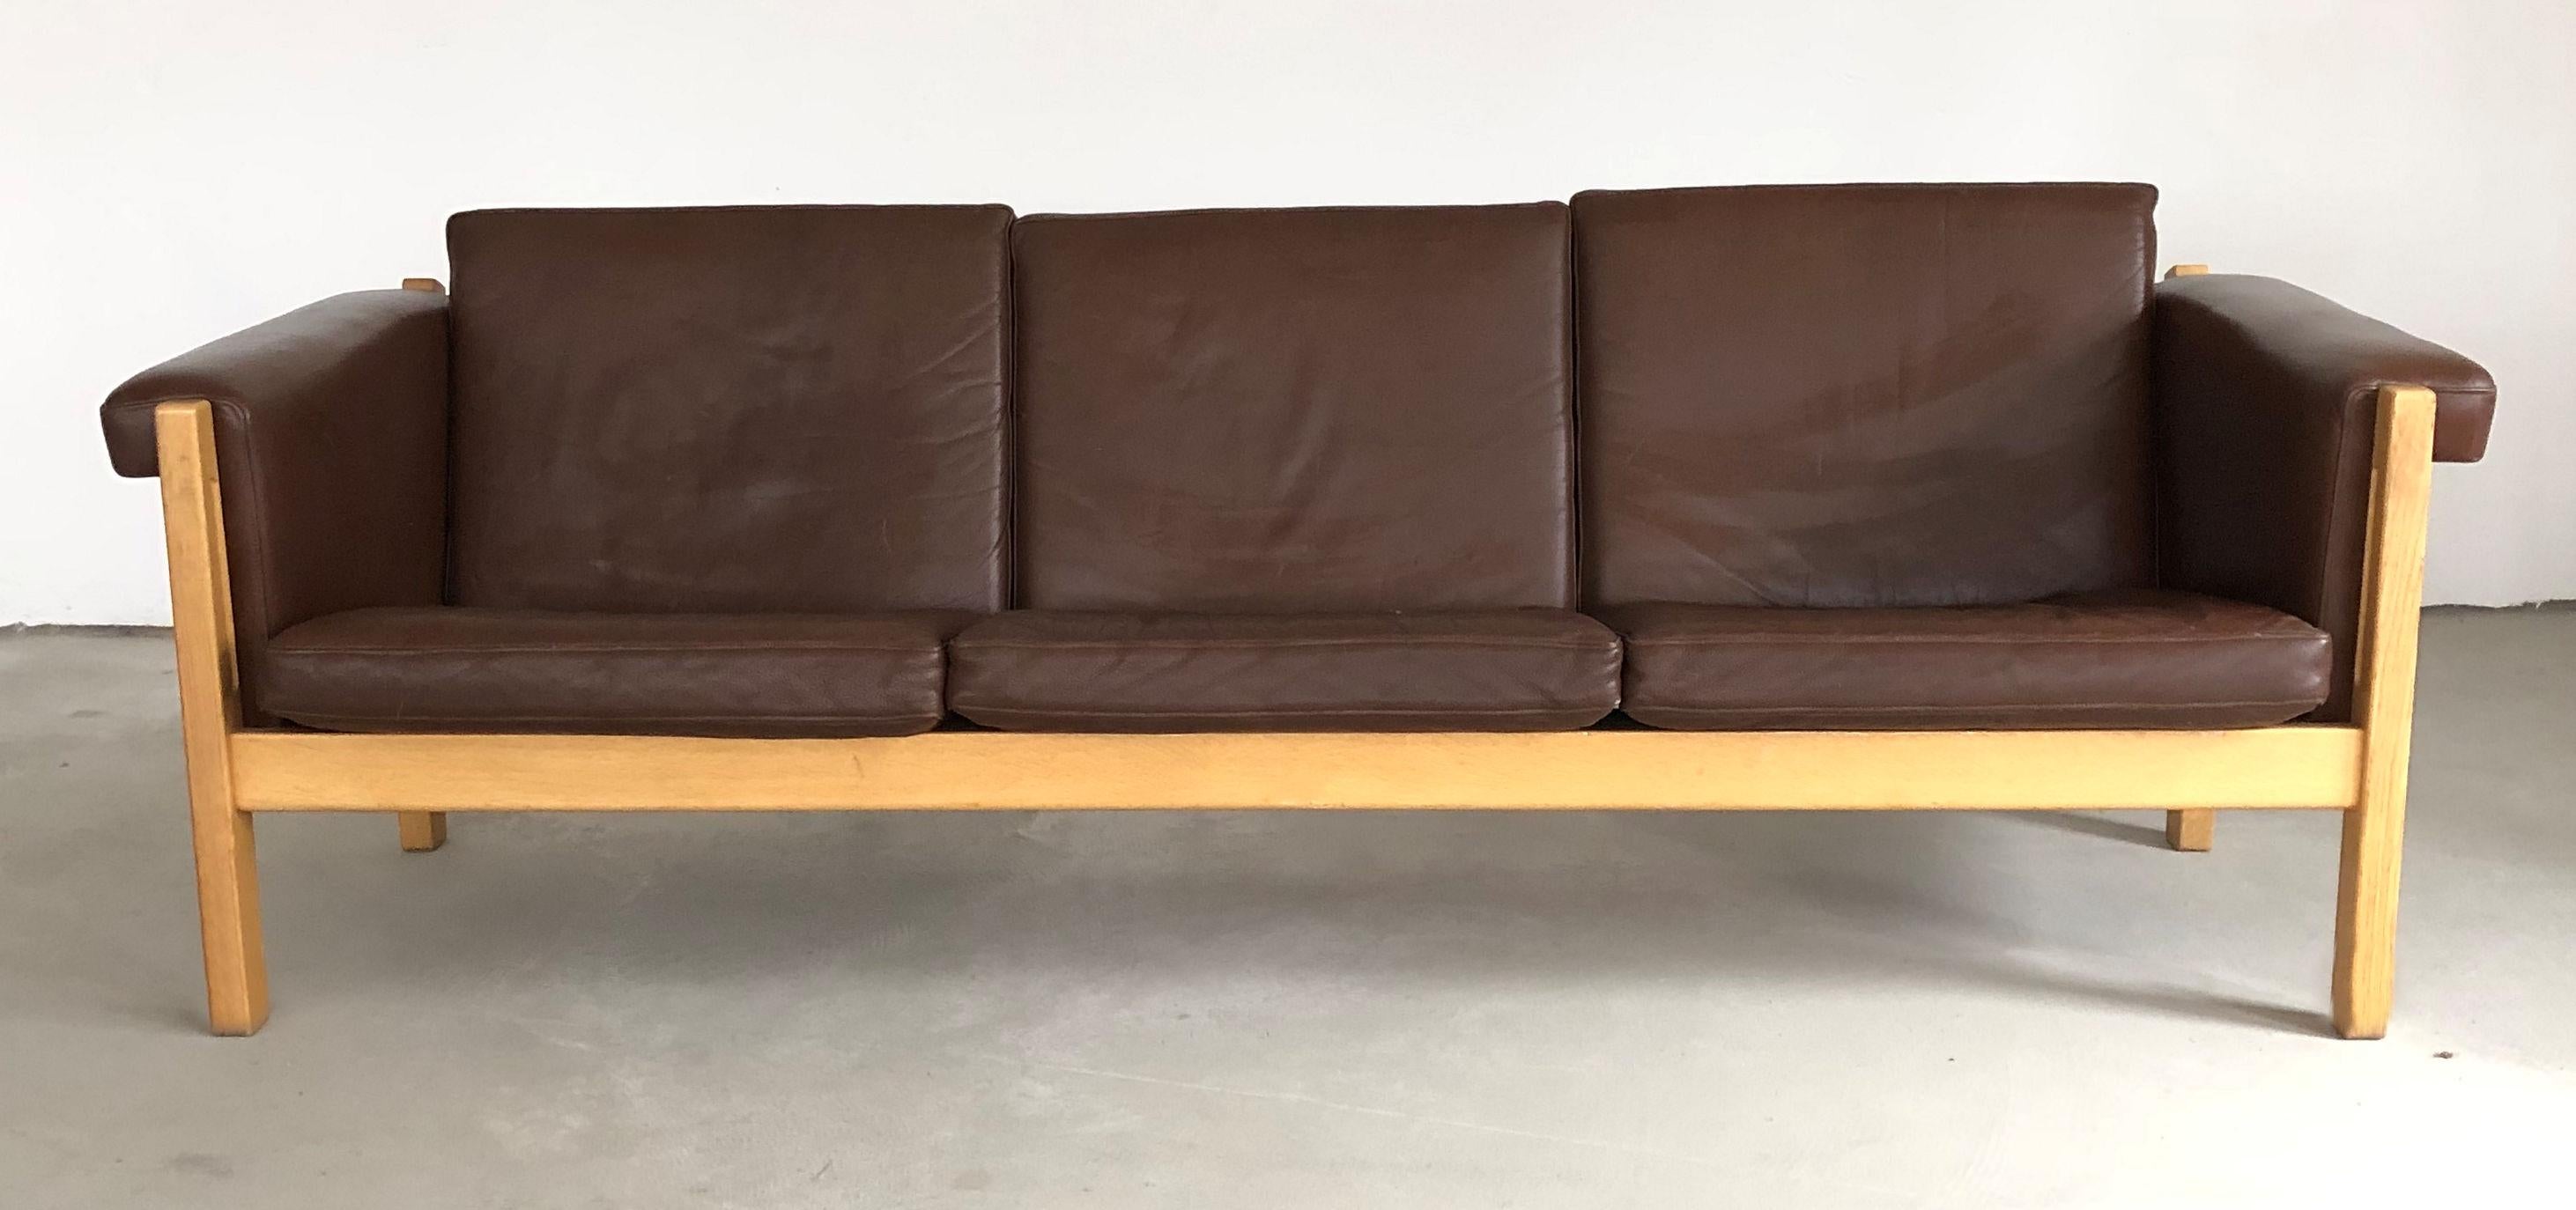 Three-seat Danish sofa in oak by Hans J. Wegner for GETAMA 

The rarely seen model GE-40 sofa with it´s simple but elegant Wegner design feature a strong oak frame with small and simple yet elegant details and original brown leather cushions, has